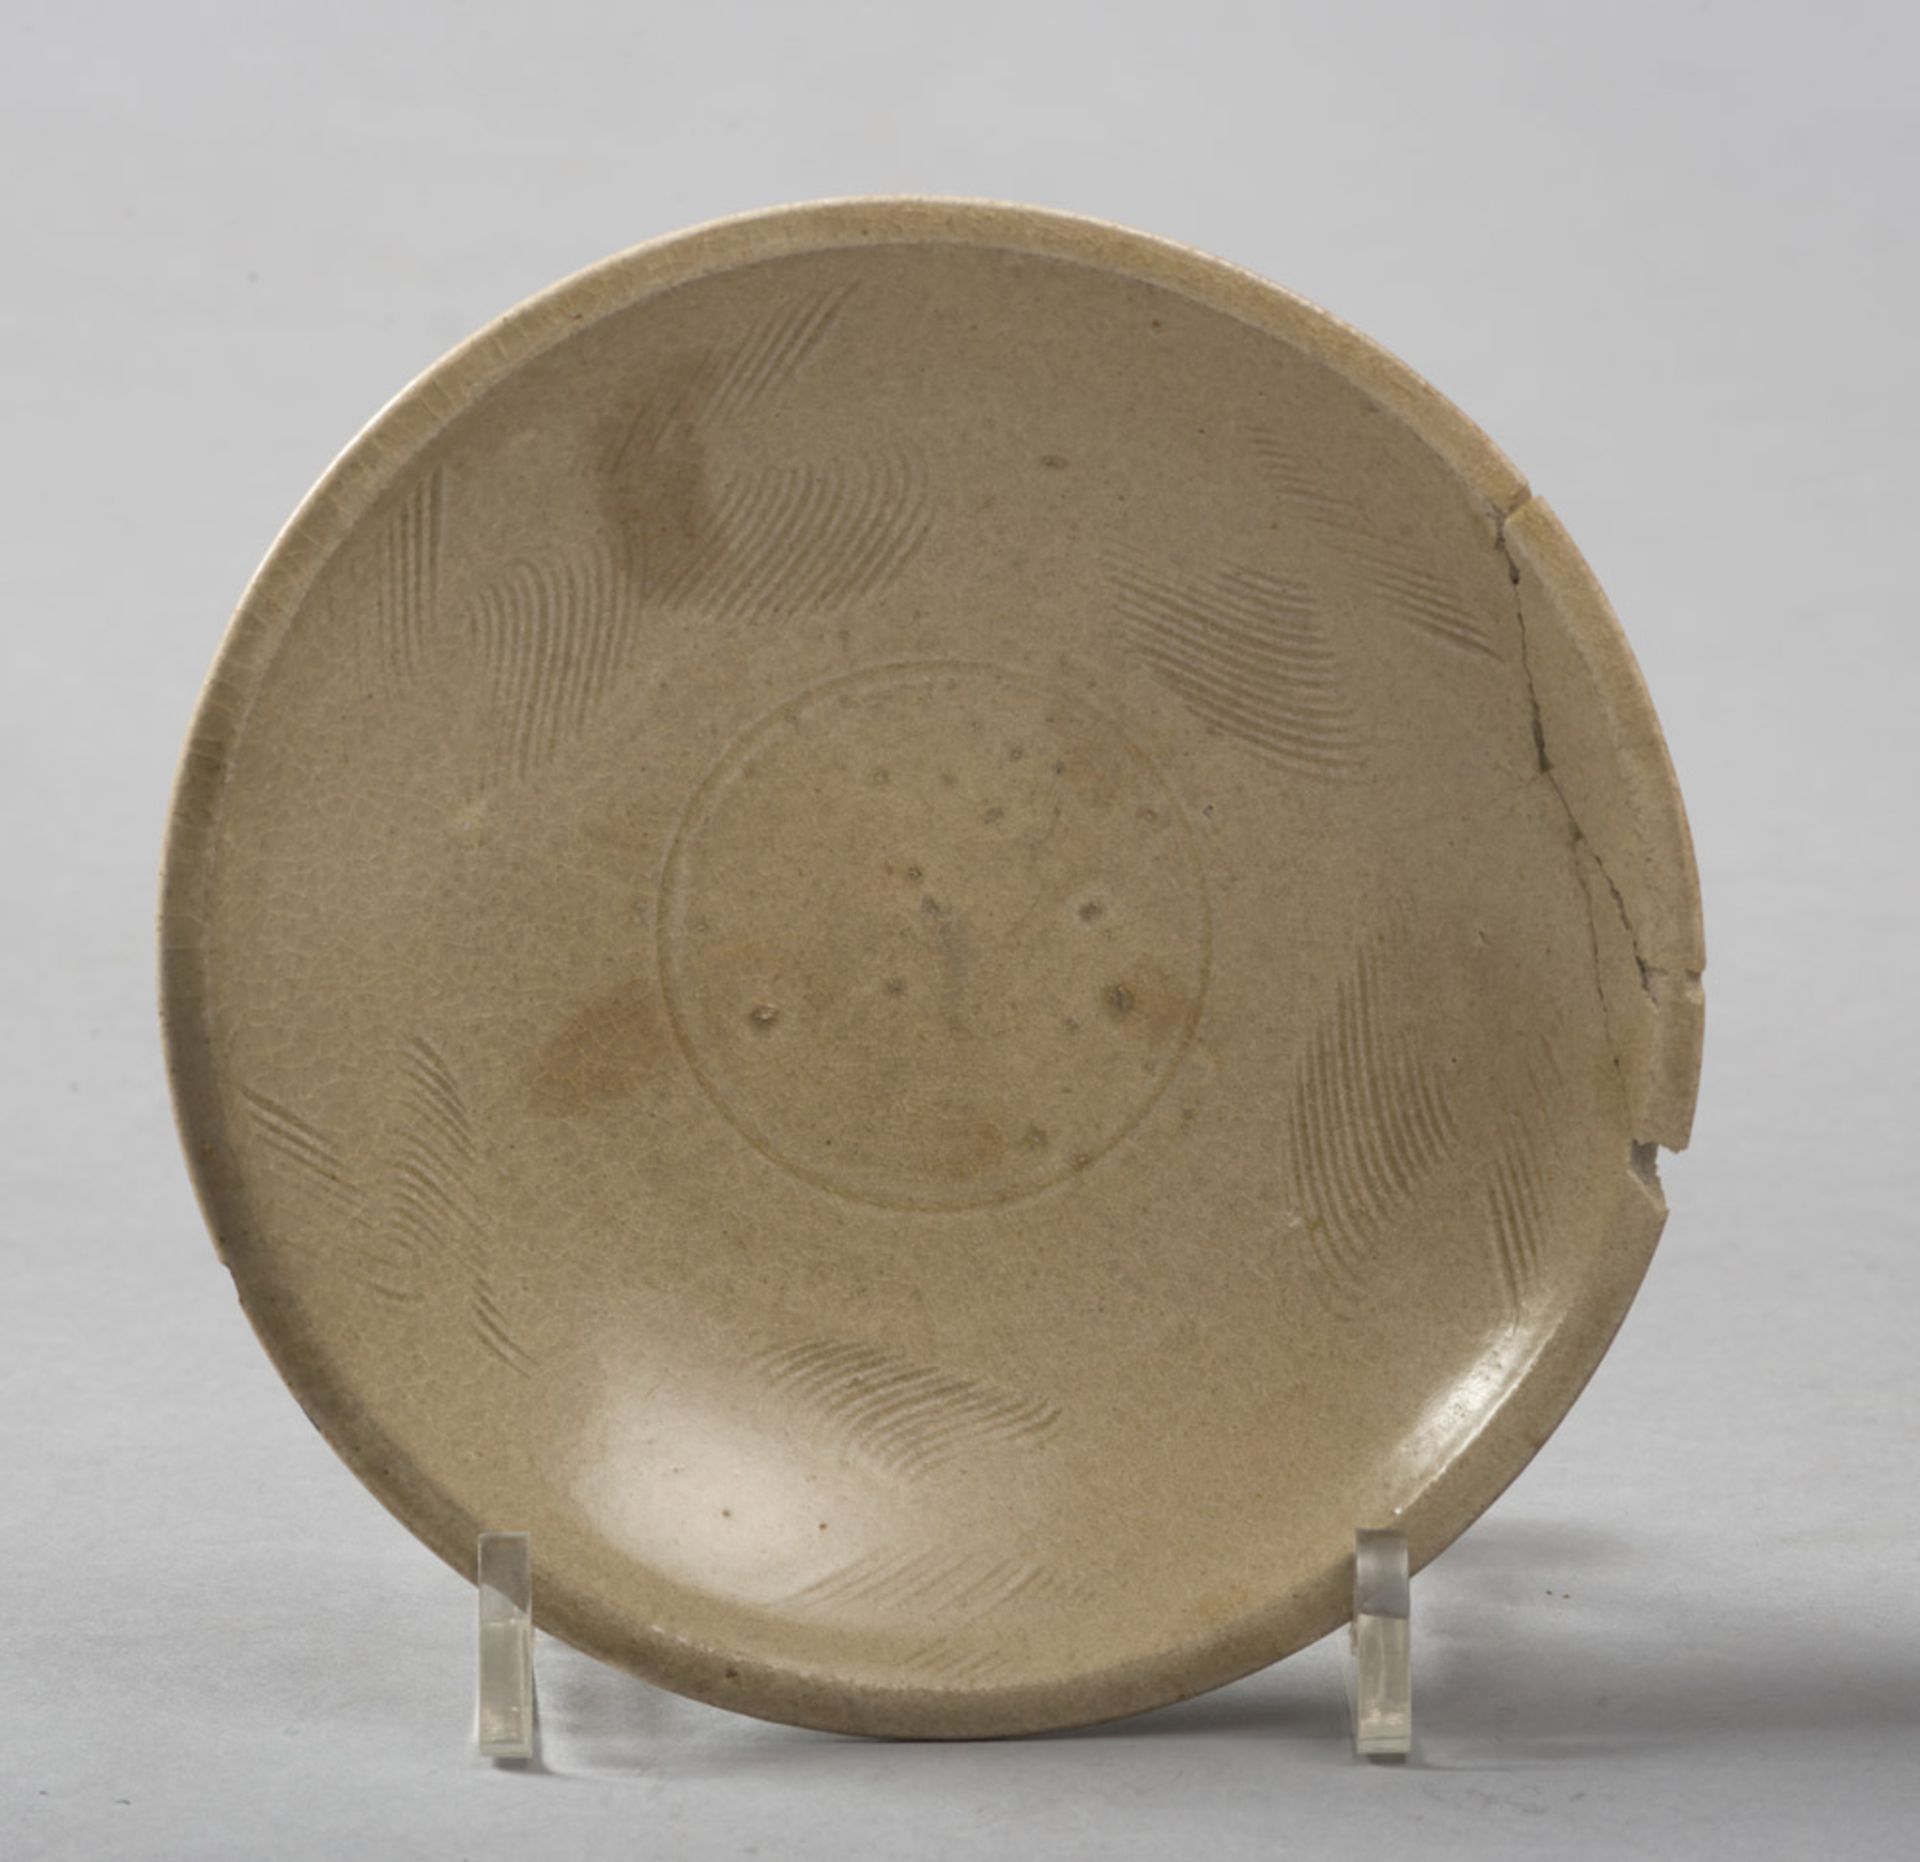 A CHINESE GLAZED STONEWARE BOWL. 12TH-14TH CENTURY.